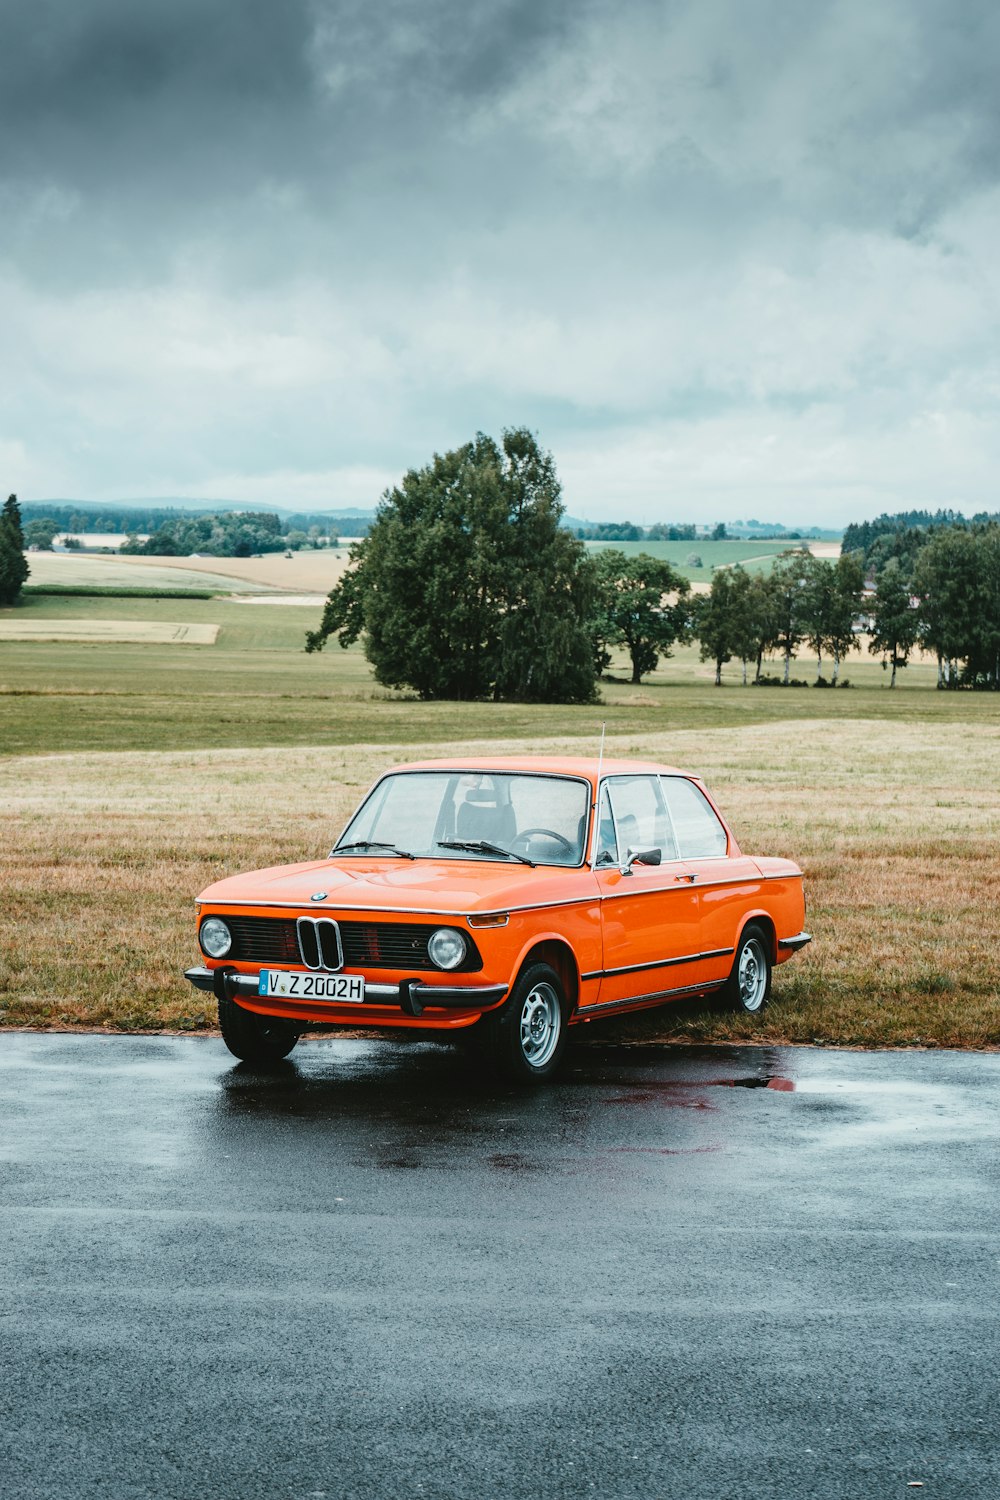 orange classic BMW coupe parked at roadside under grey cloudy sky